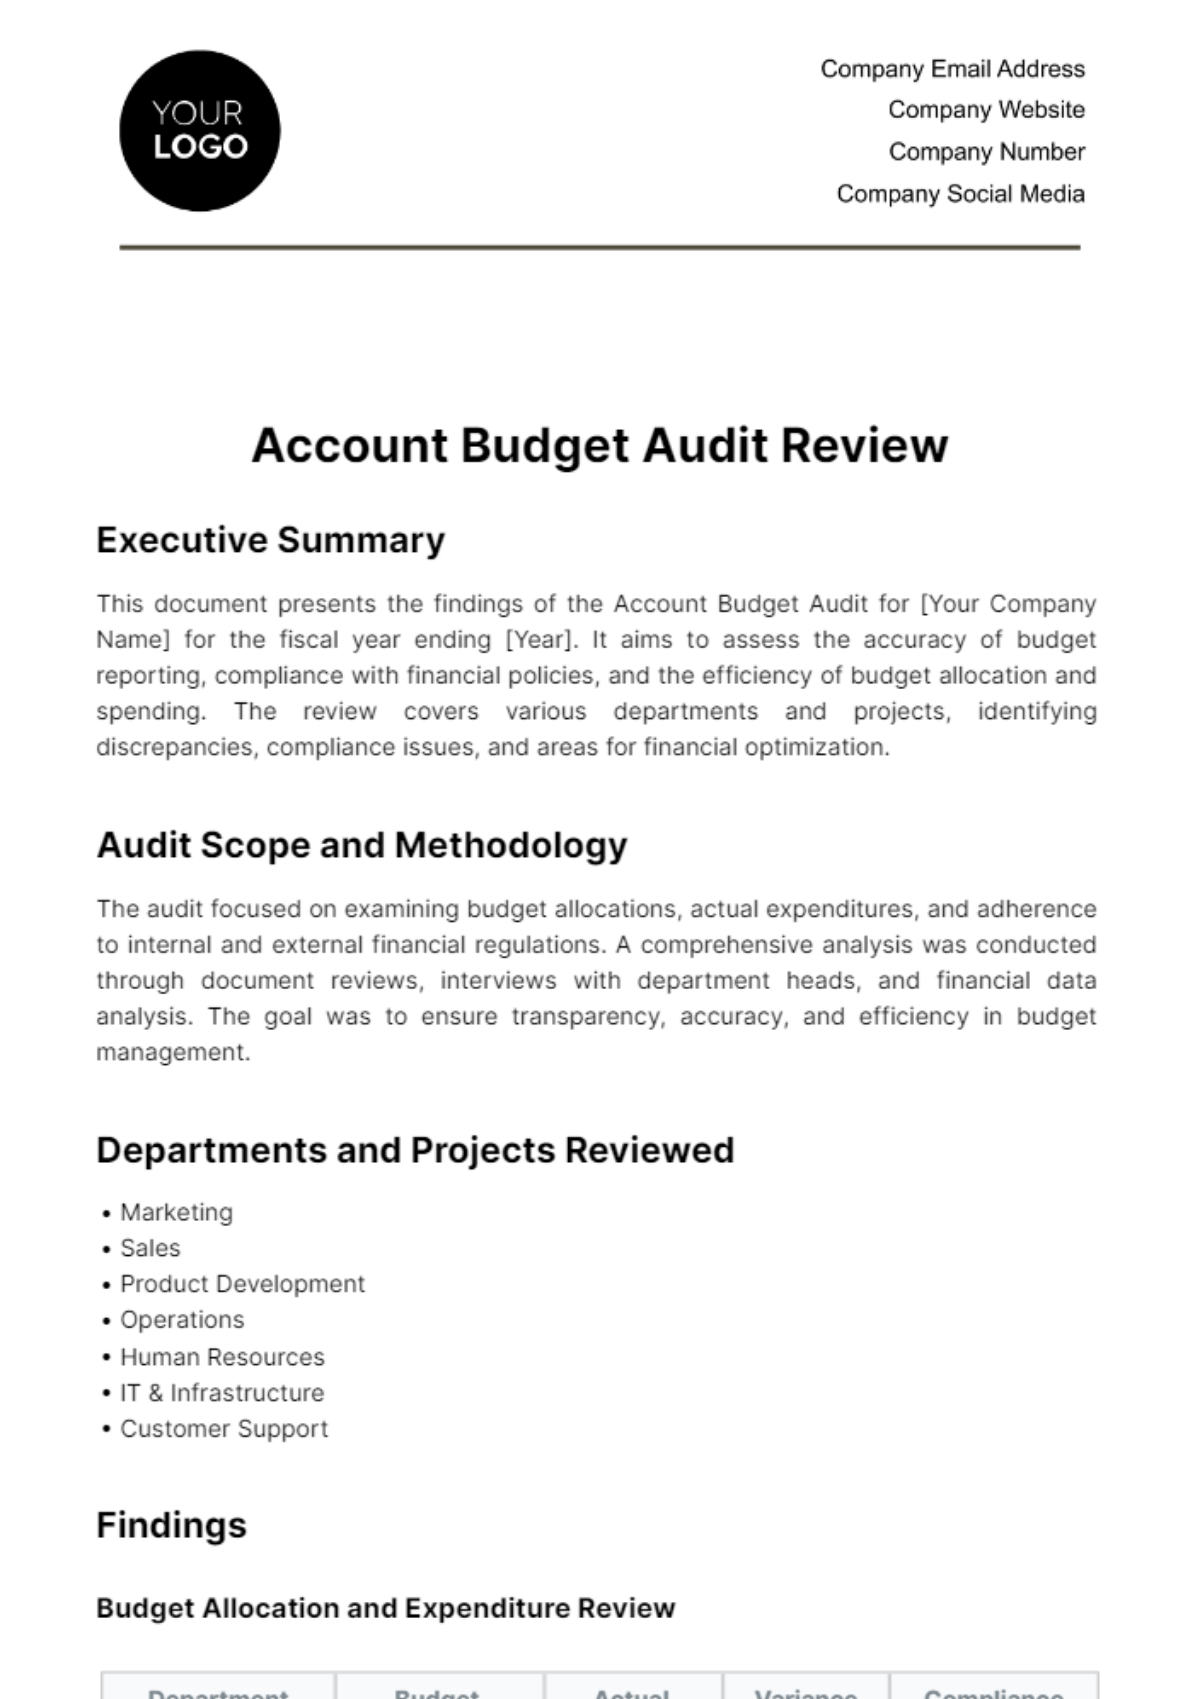 Account Budget Audit Review Template